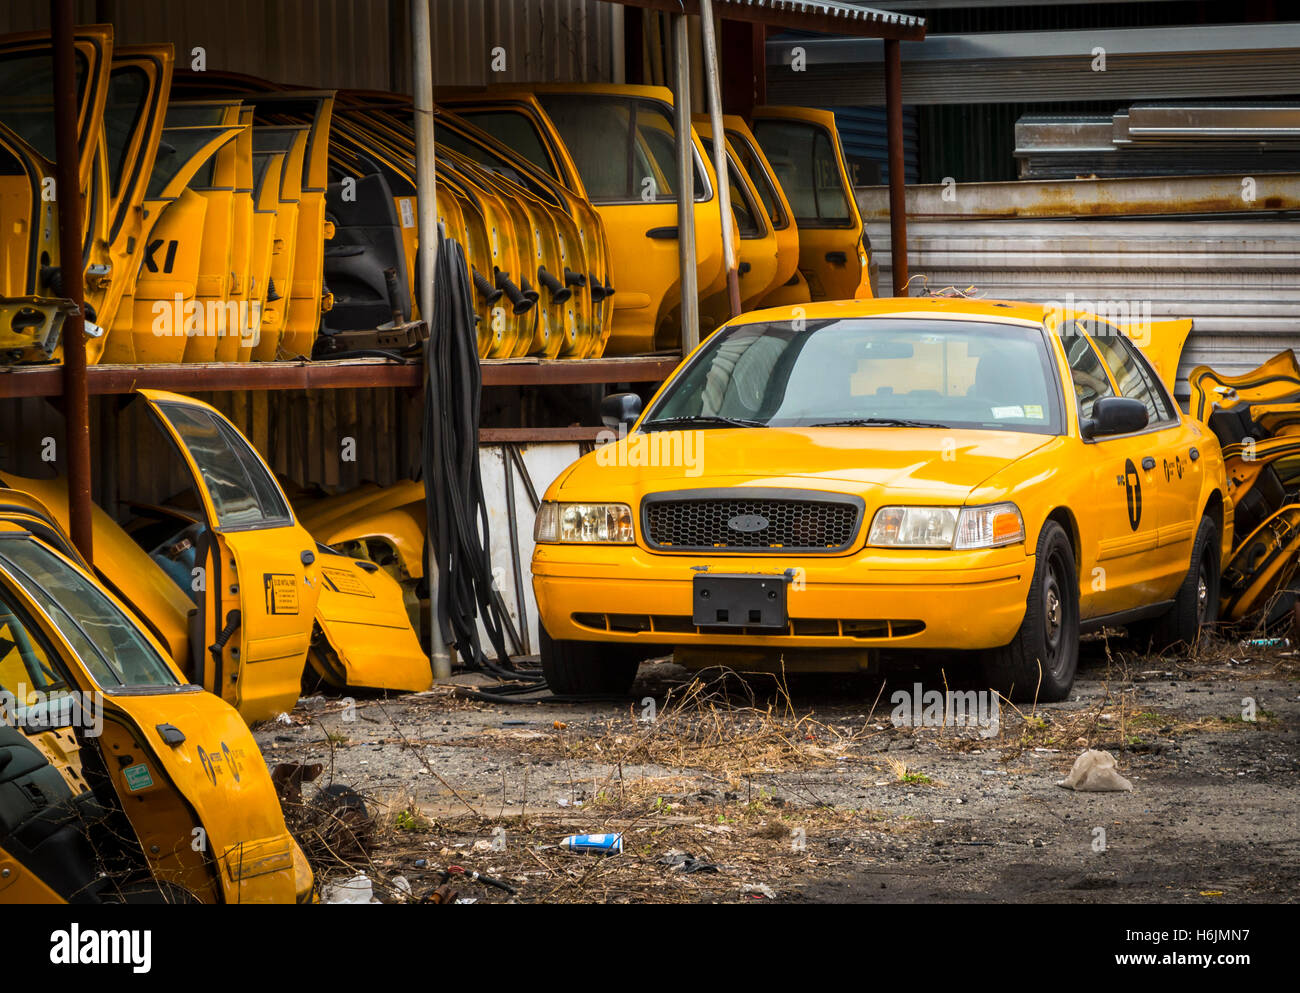 Yellow taxi cab junk yard / repair garage with spare doors stacked beside the cars. Stock Photo